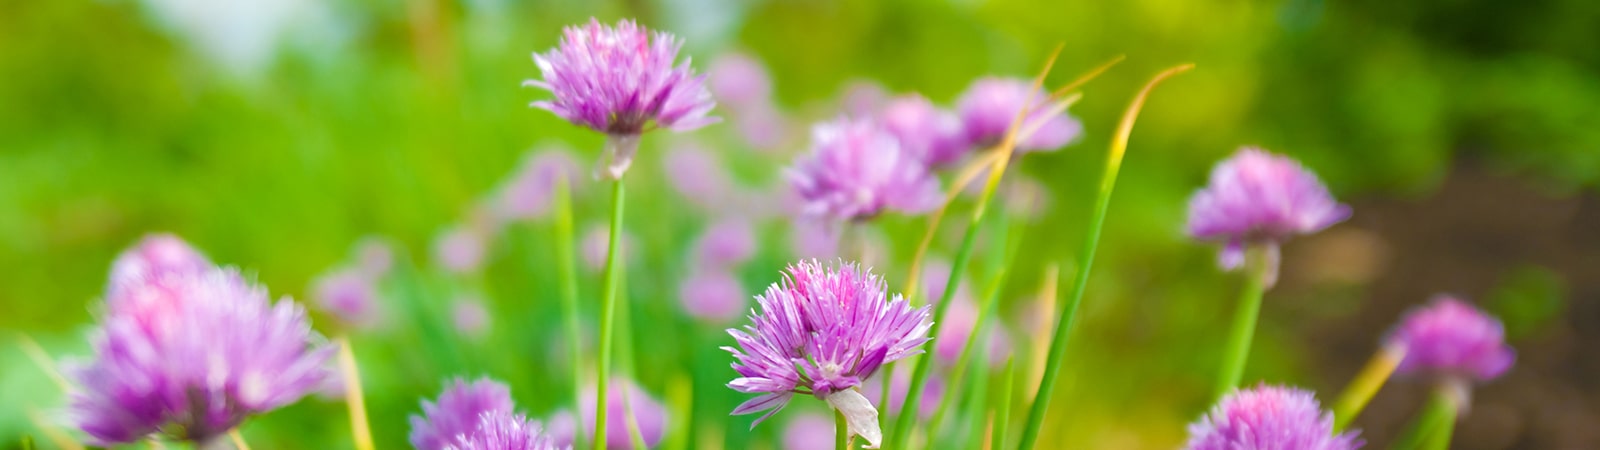 Pink flowers among a green blurry background.